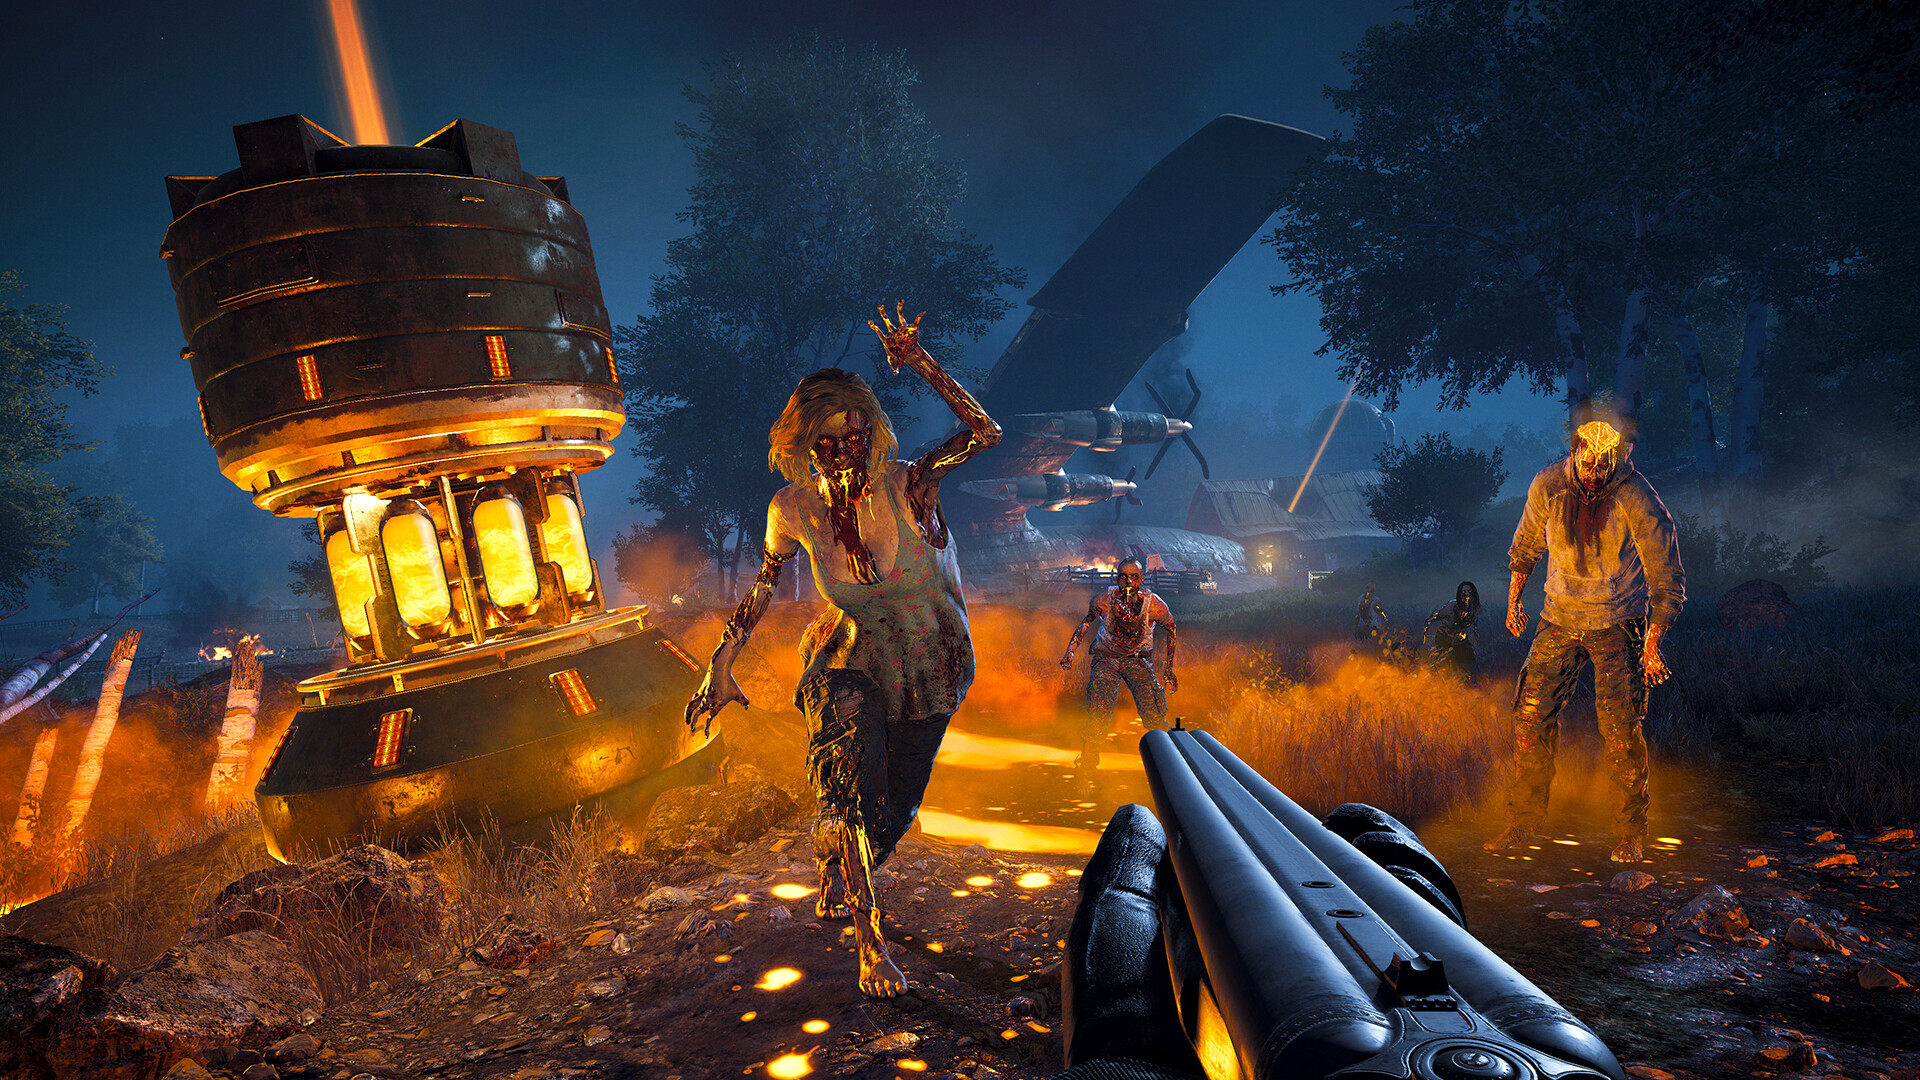 Steam User is Outrage Over Far Cry 5 Unable to Open Hours of Darkness DLC –